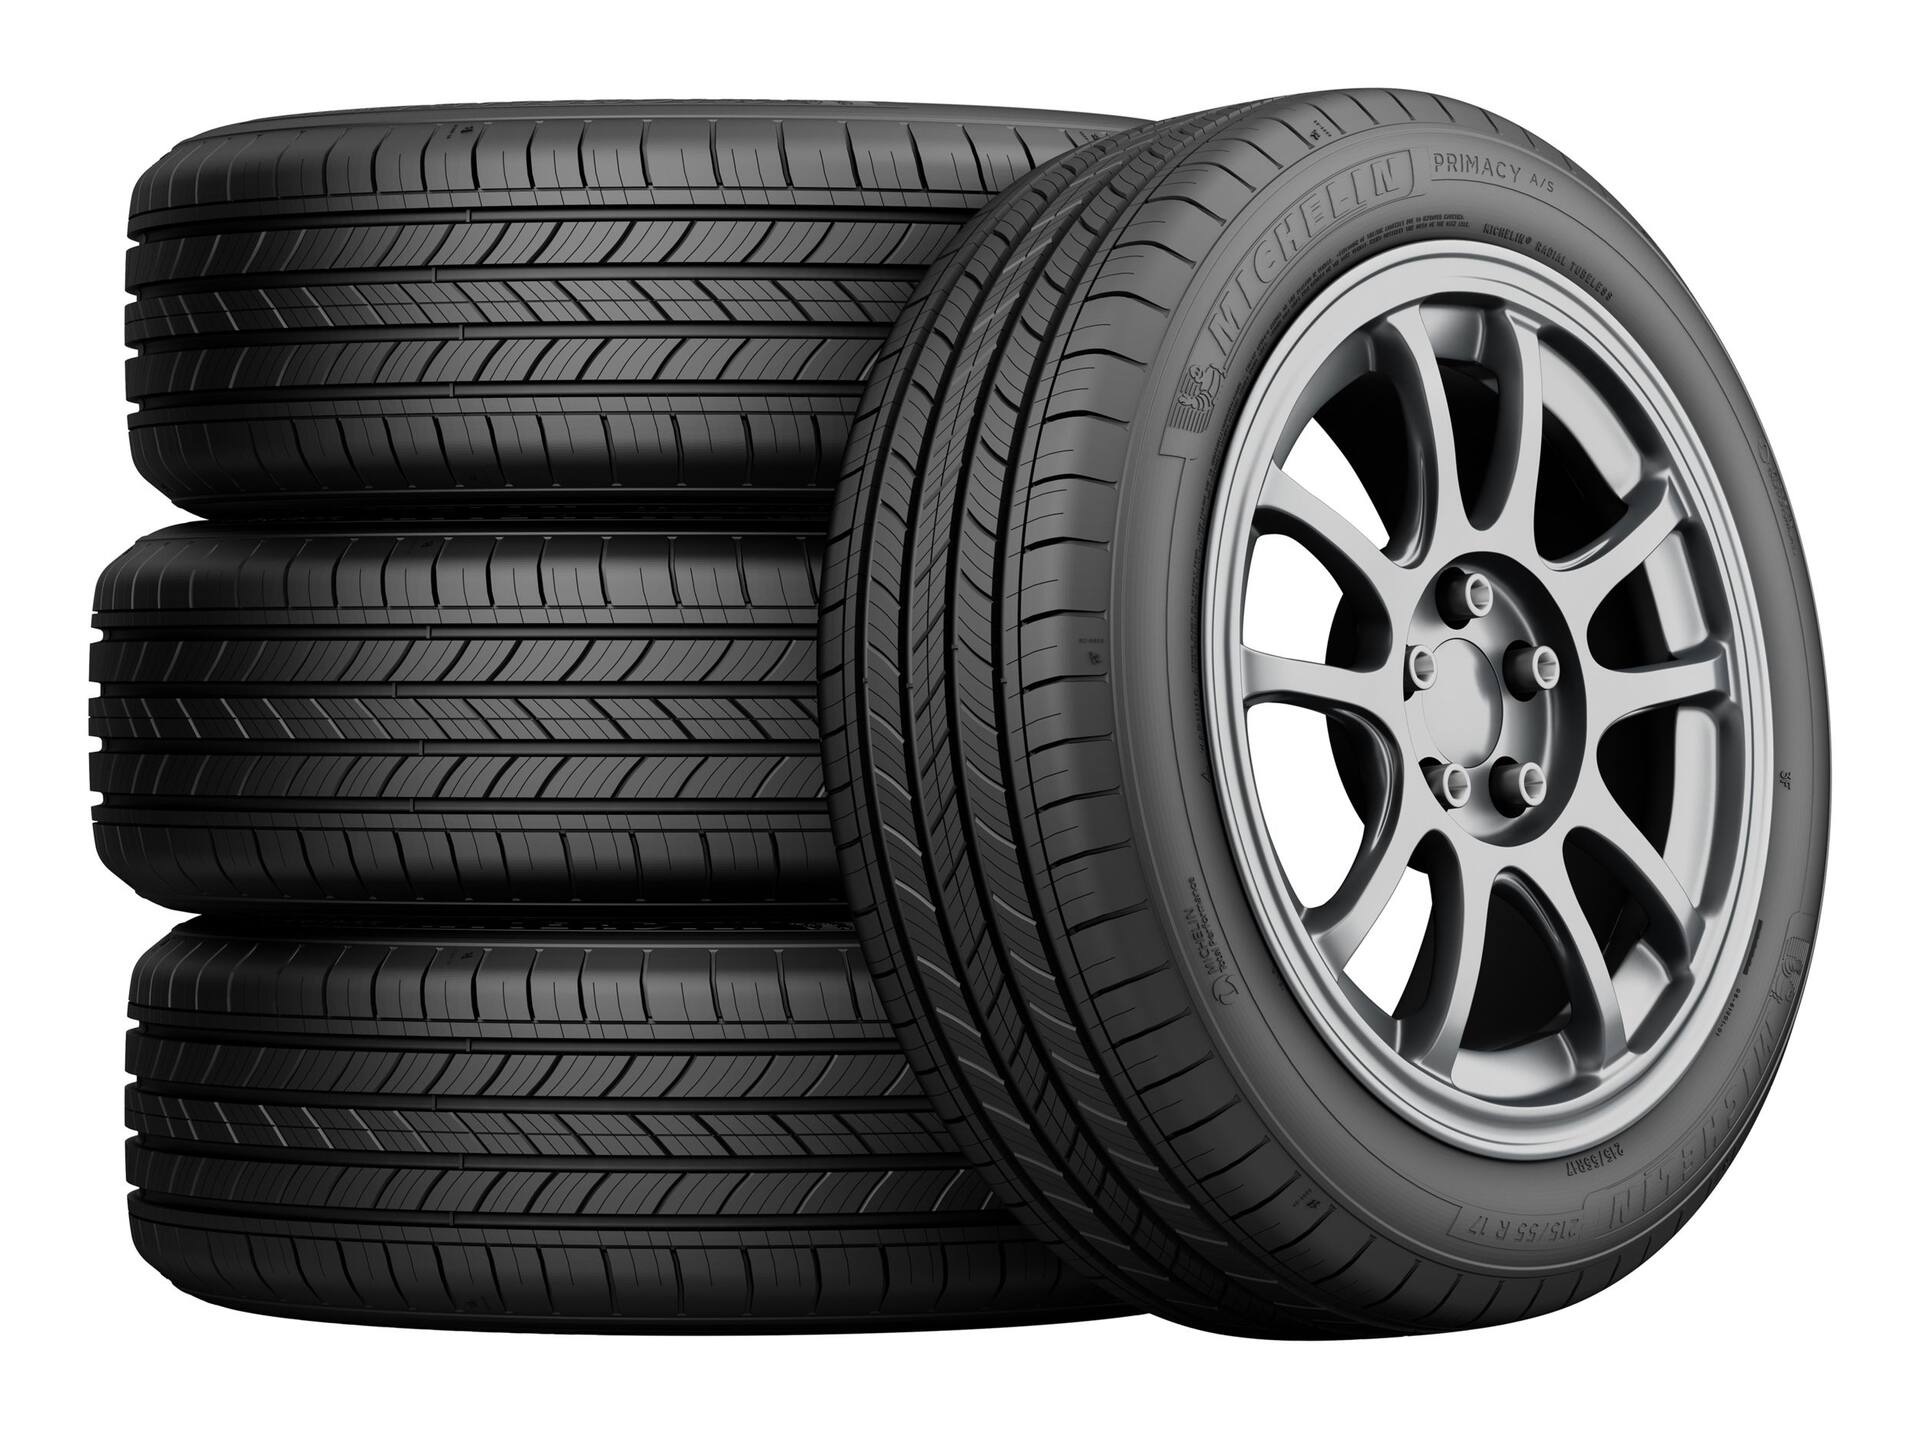 Michelin Primacy A/S Performance Tire For Passenger & CUV